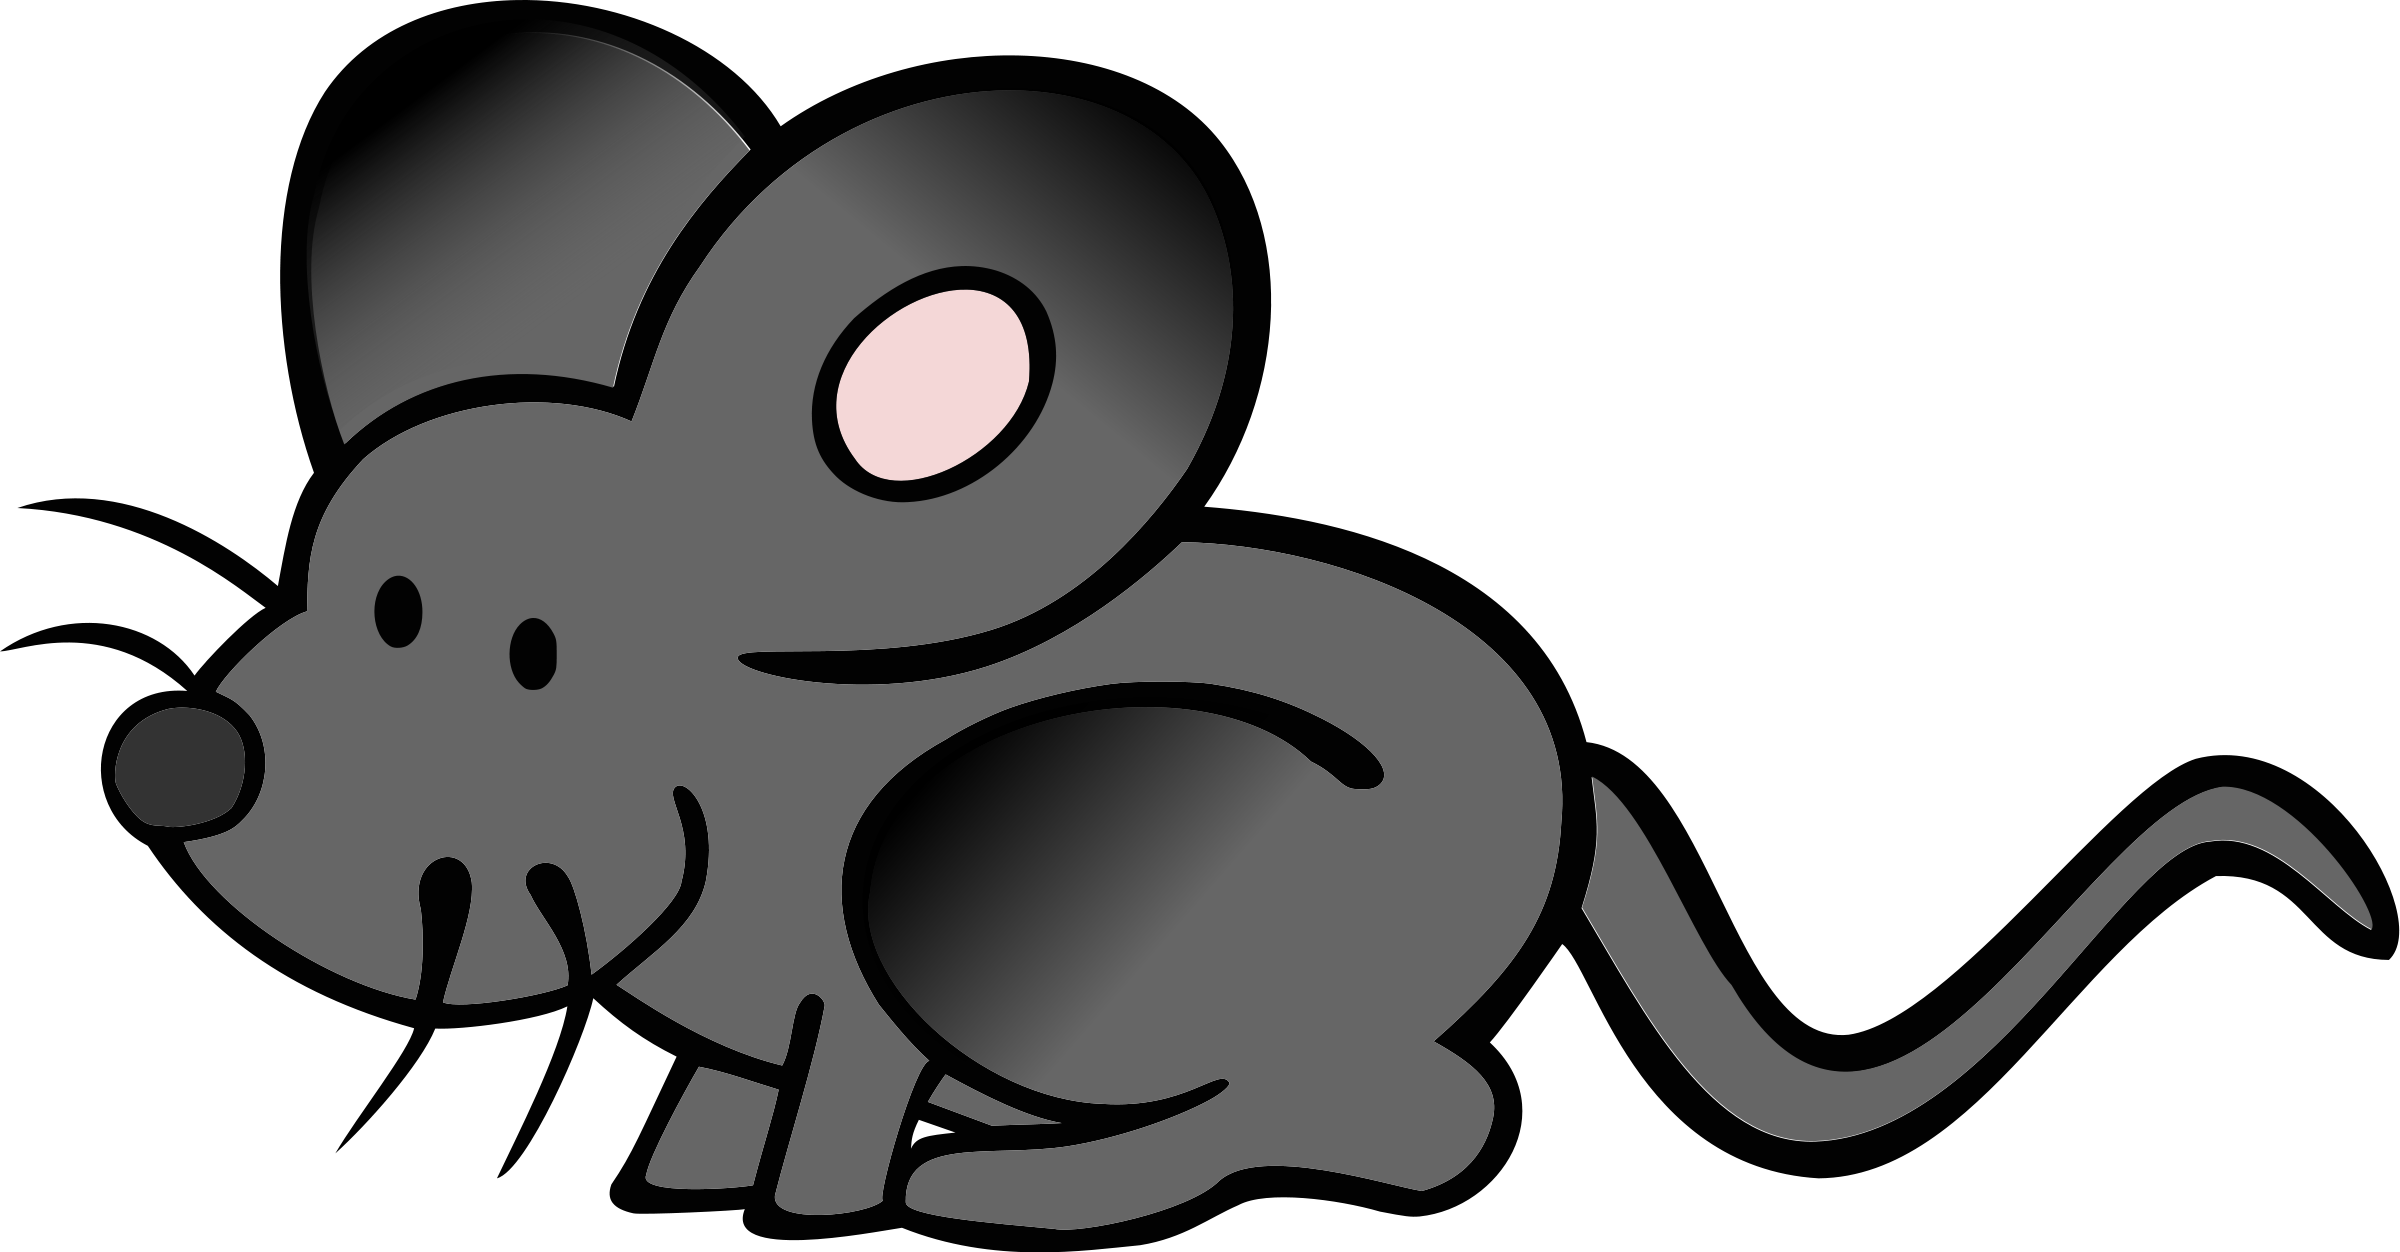 Free Mouse Cartoon Pics, Download Free Mouse Cartoon Pics png image, Free C...